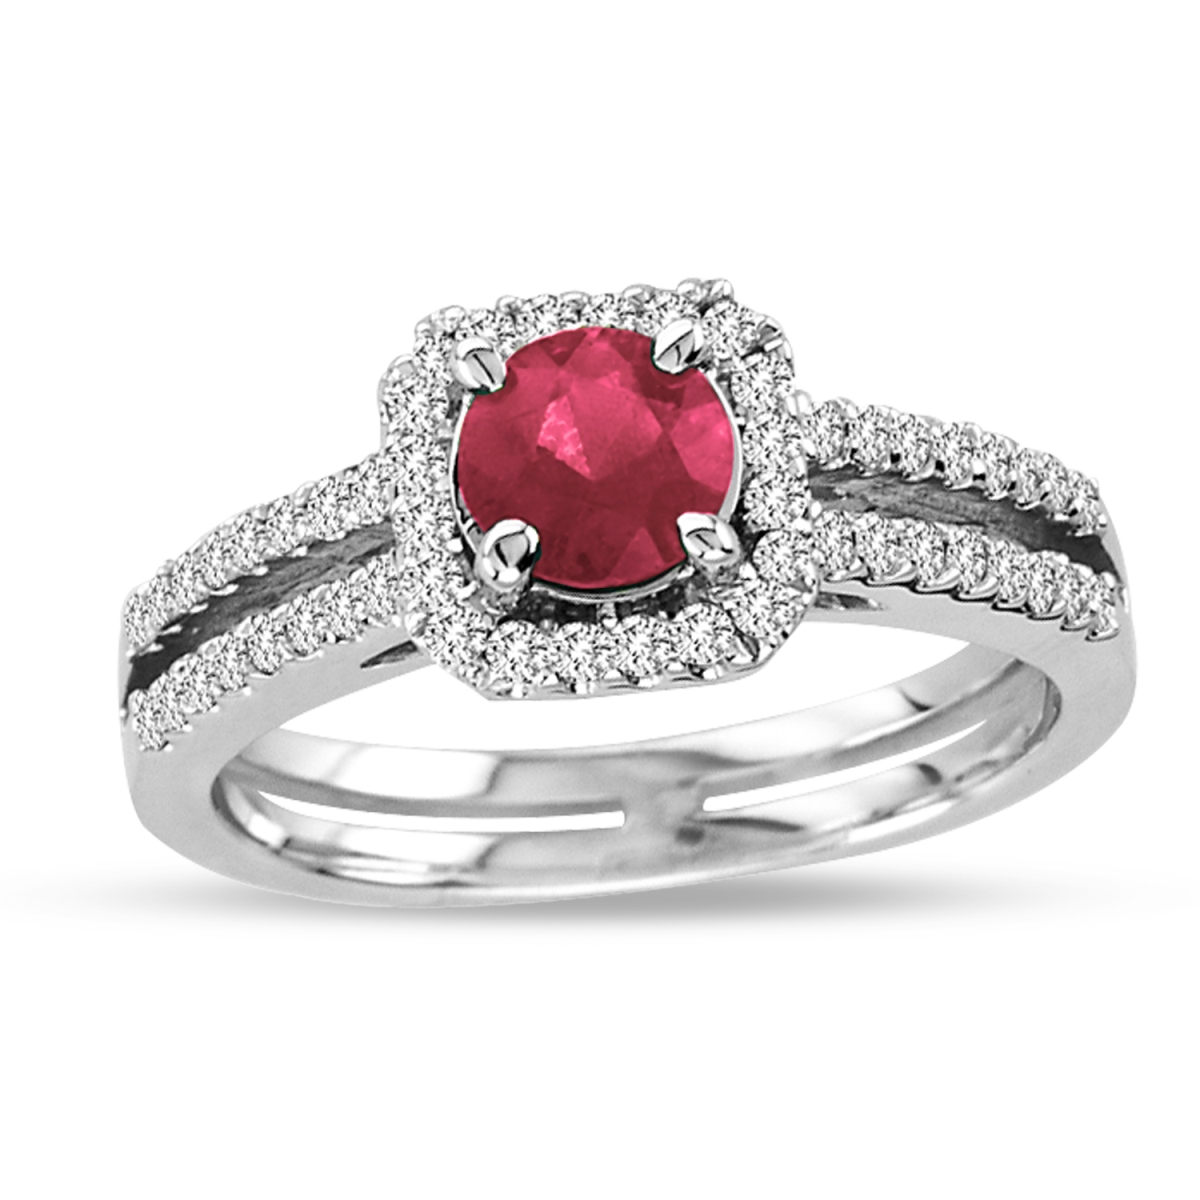 Picture of Louis Creations RL1140RD-8.5 14K Gold Ring with 0.75 CT Natural Heated Ruby & 0.40 CTTW of Round Diamonds Rings - Size 8.5